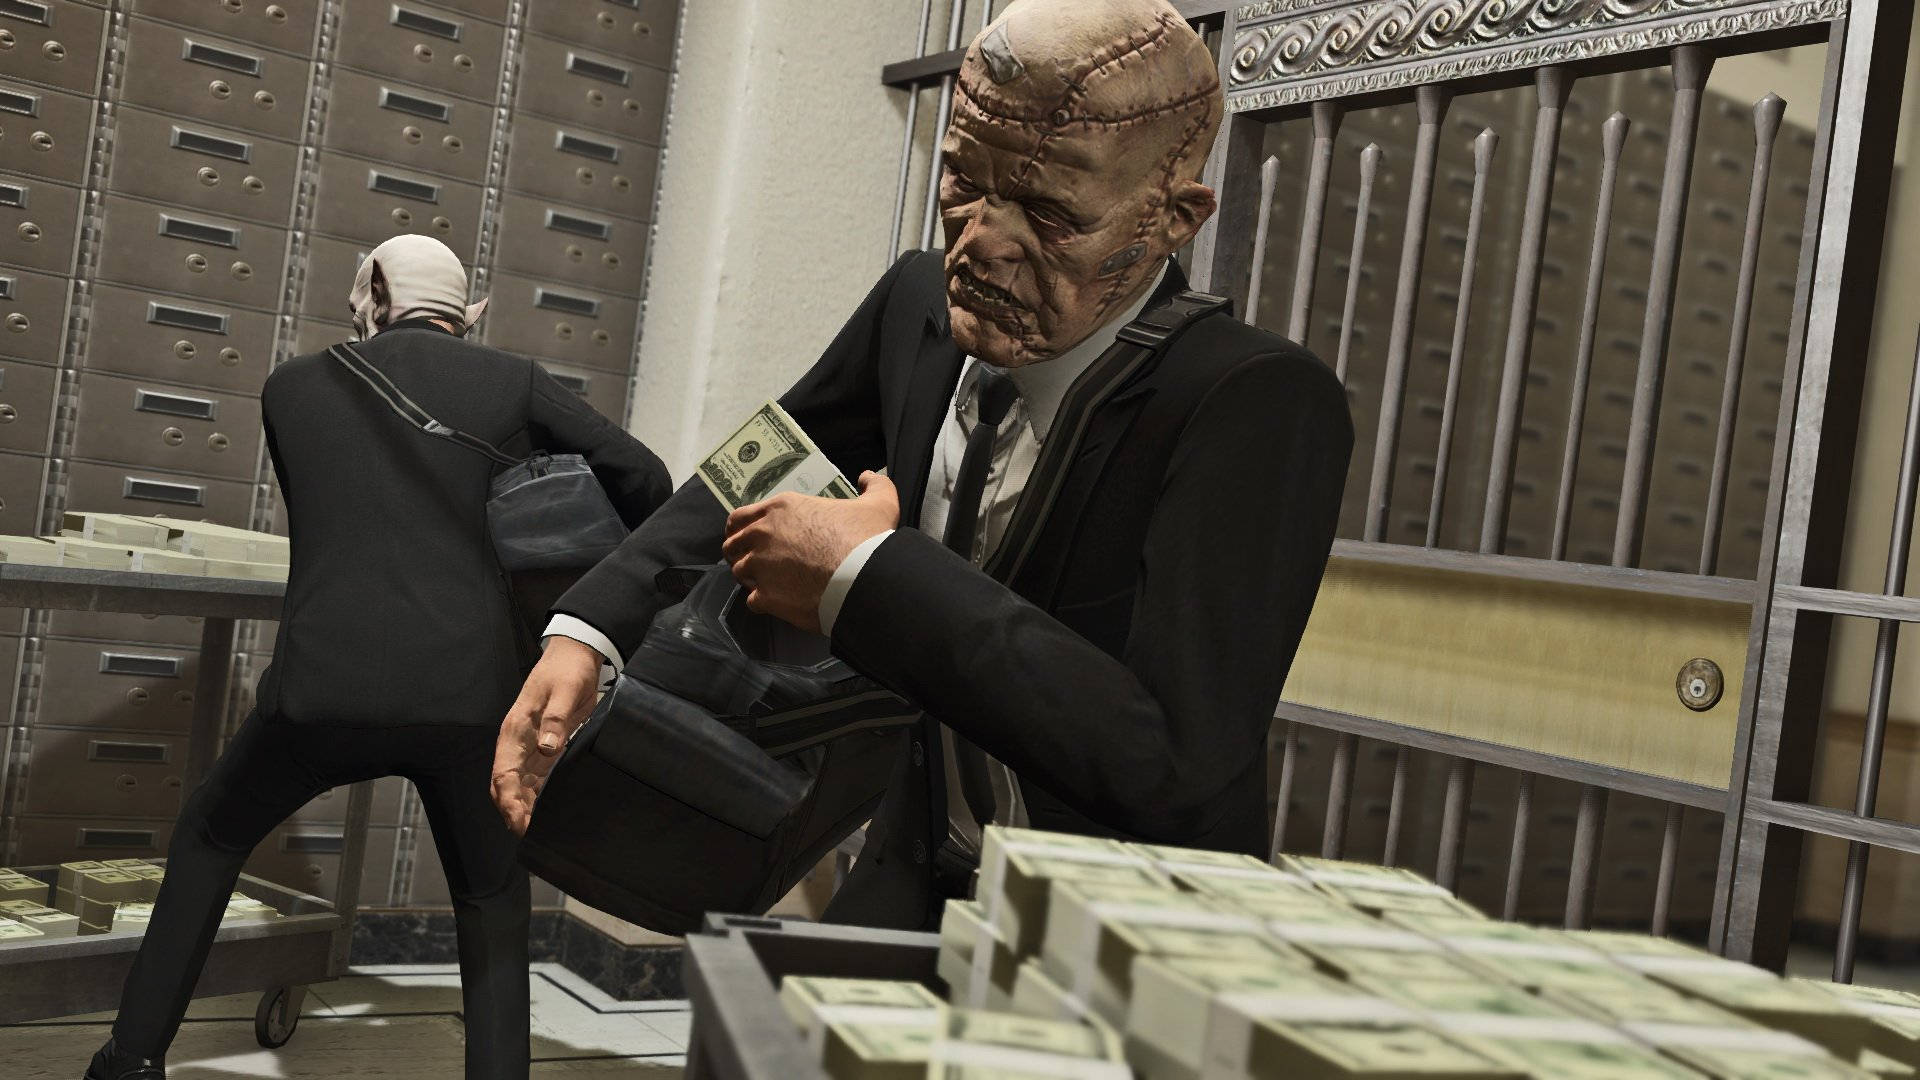 Grand Theft Auto V Stealing Money Background